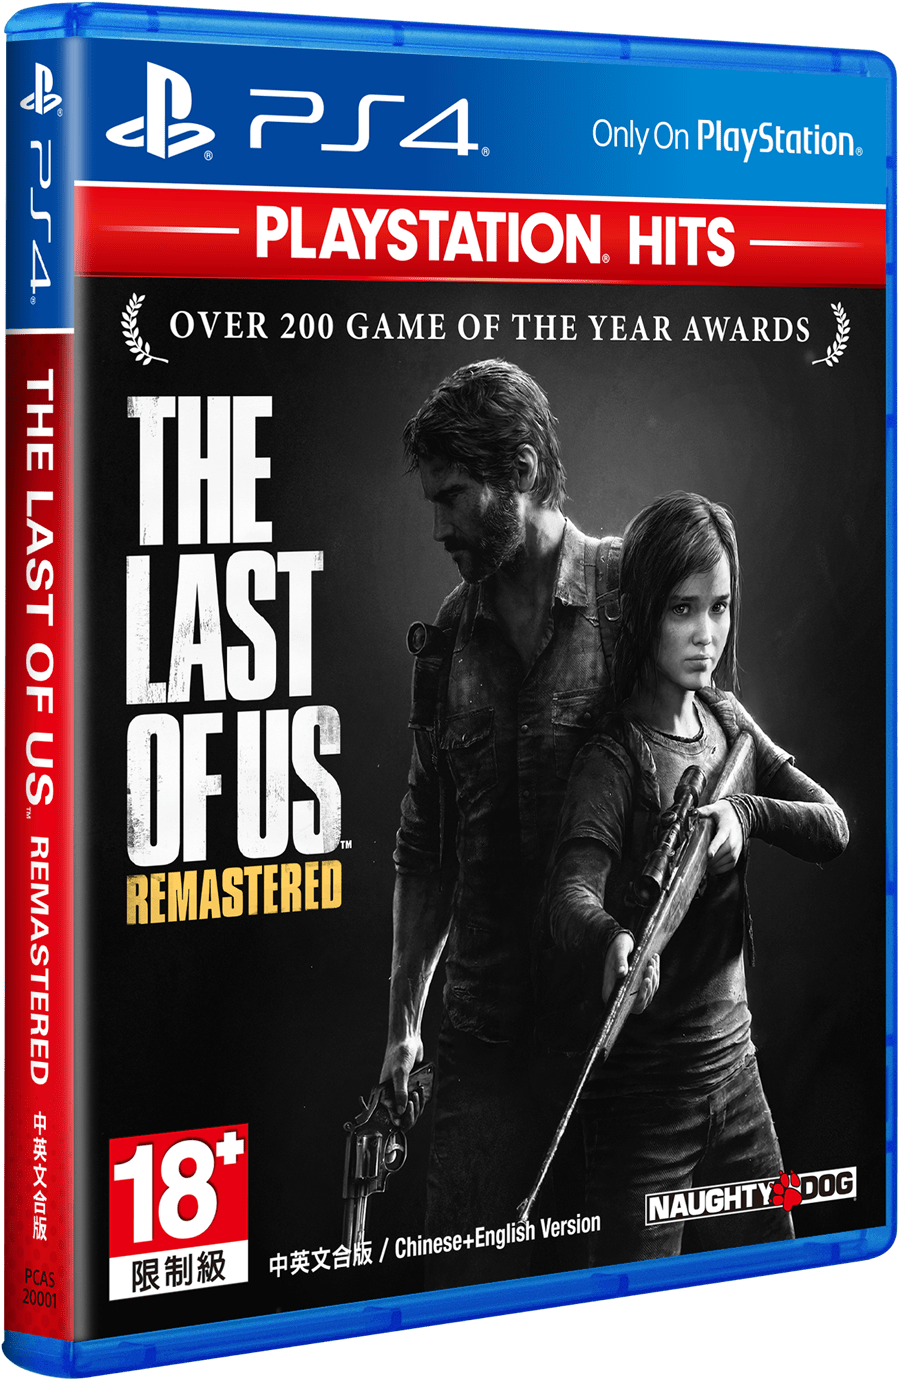 The Lastof Us Remastered P S4 Game Cover PNG